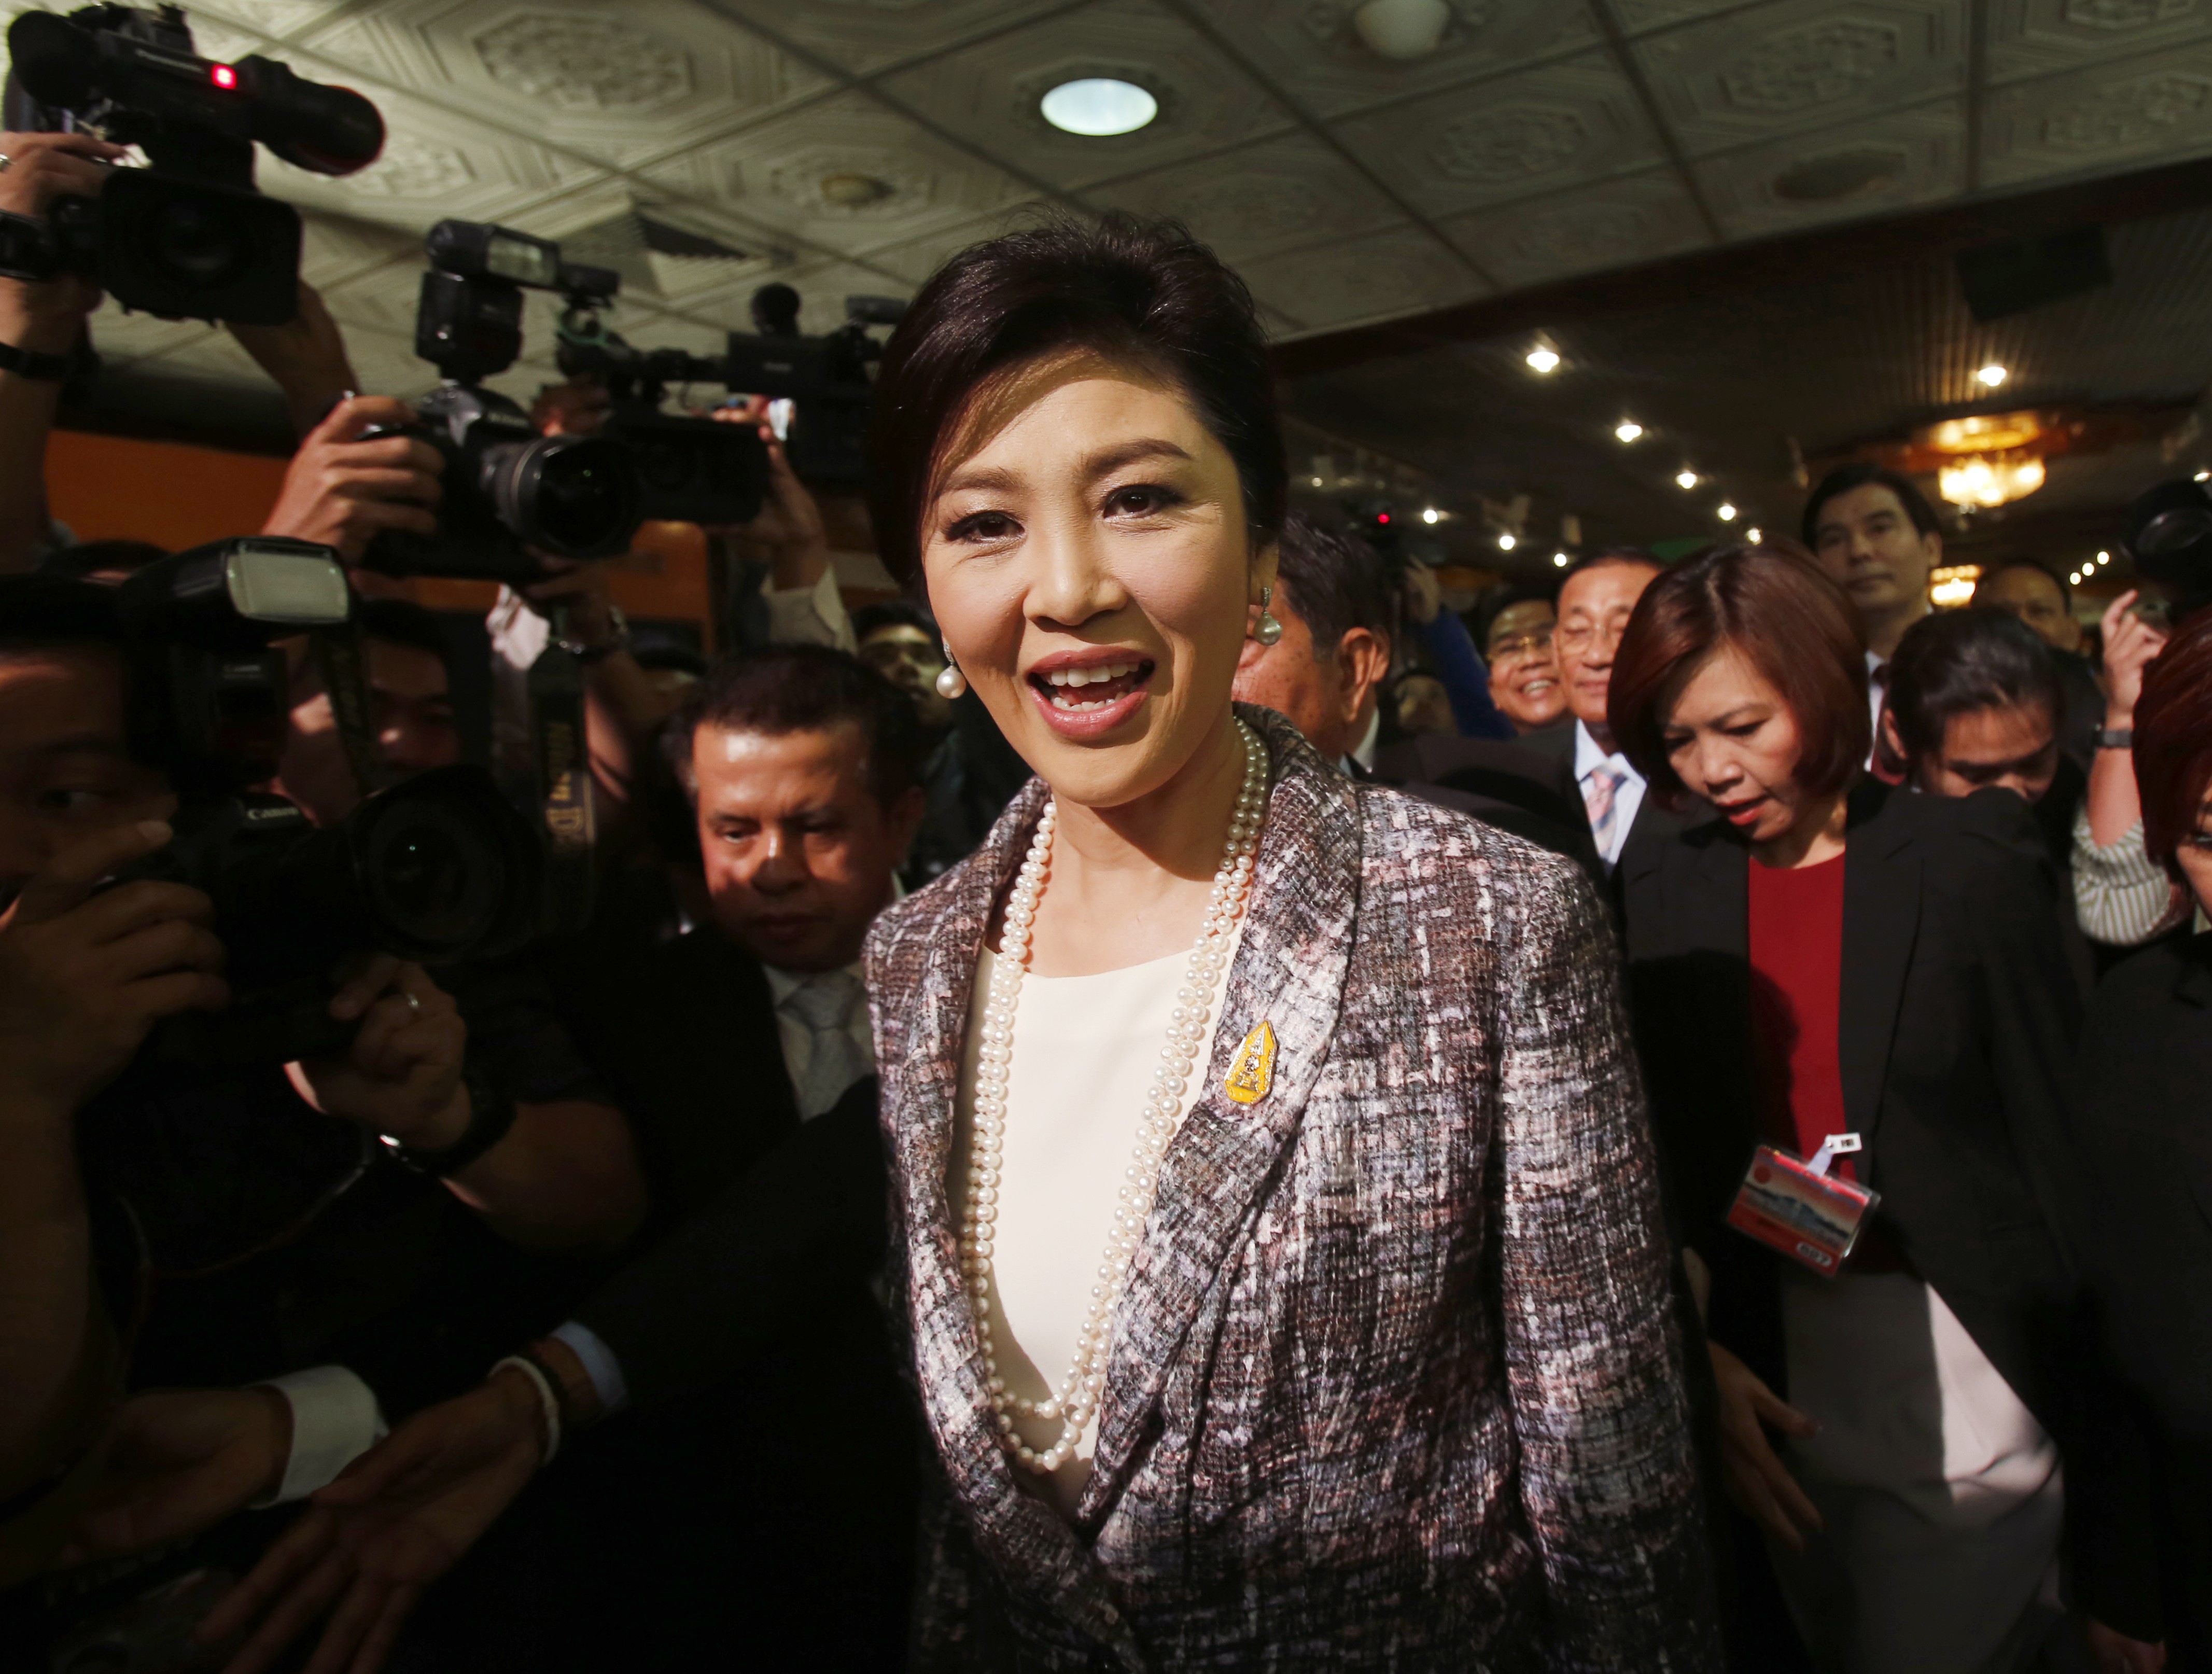 Thailand's former prime minister Yingluck Shinawatra set up a company in Hong Kong using a Cambodian passport. Photo: AP